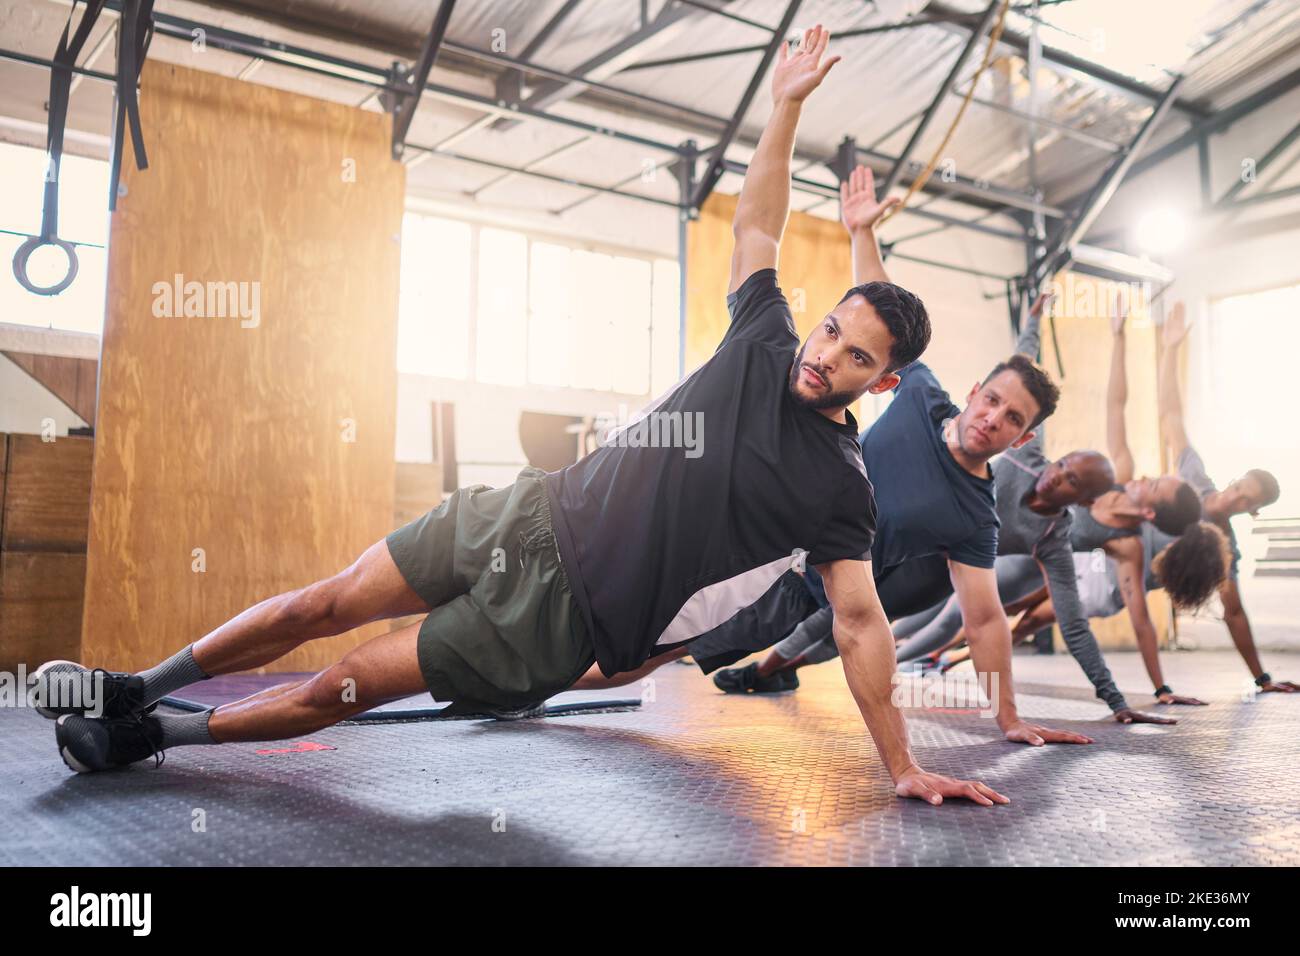 Strong man, personal trainer and group training with side plank exercise, workout and fitness in gym club. Bodybuilder coach teaching sports class Stock Photo